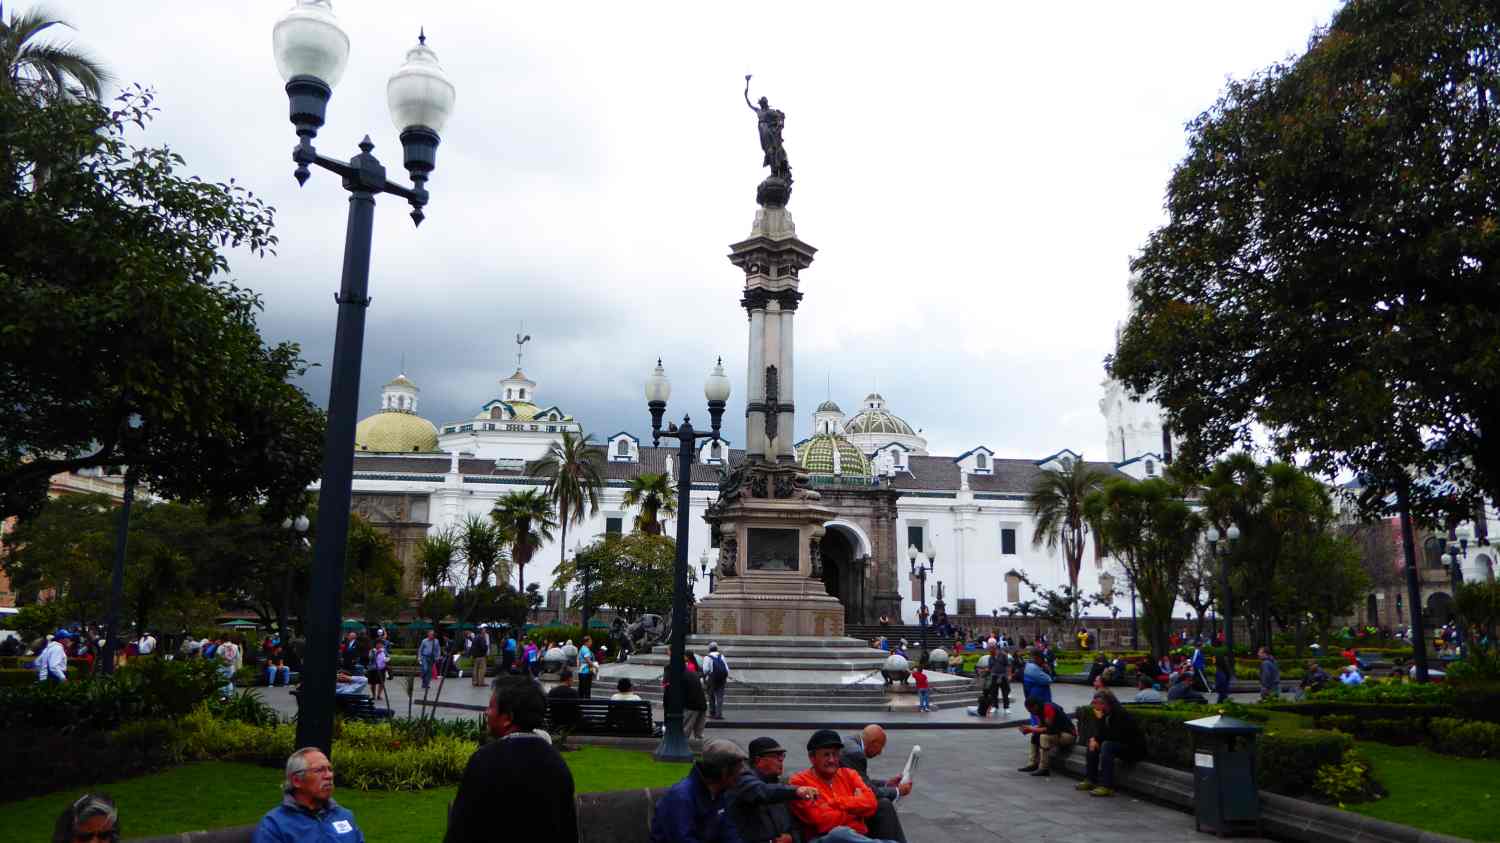 The obligatory square with a monument of heroes